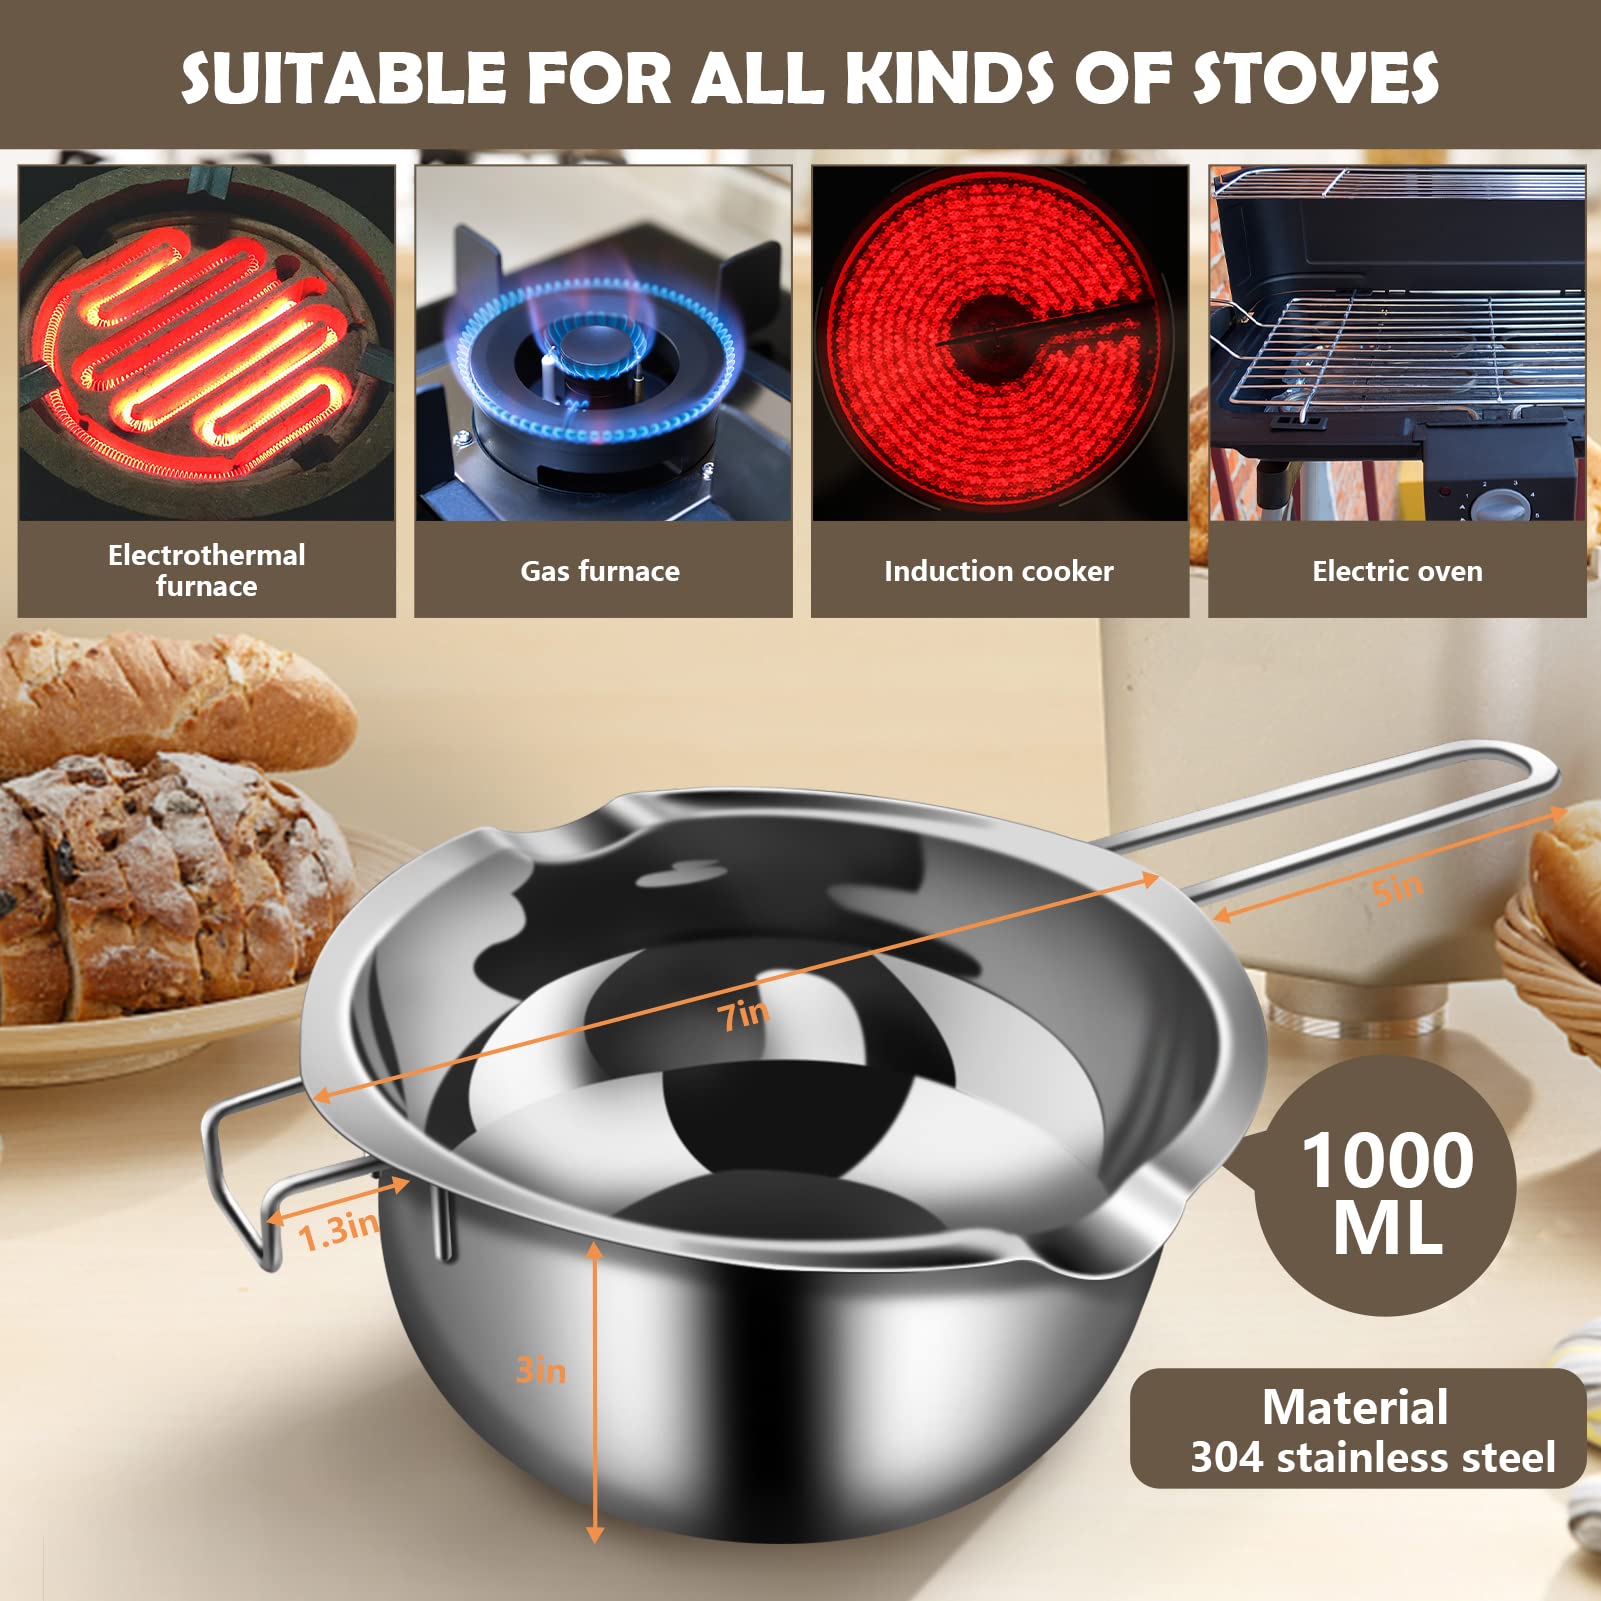 Artcome 5pcs Double Boiler Melting Pot Set - 600ML/0.6QT and 1000ML/1QT Chocolate Stainless Steel Melting Pot, Decorating Spoons, Silicone Spatula and Dipping Tool for Melting Chocolate, Candy, Soap